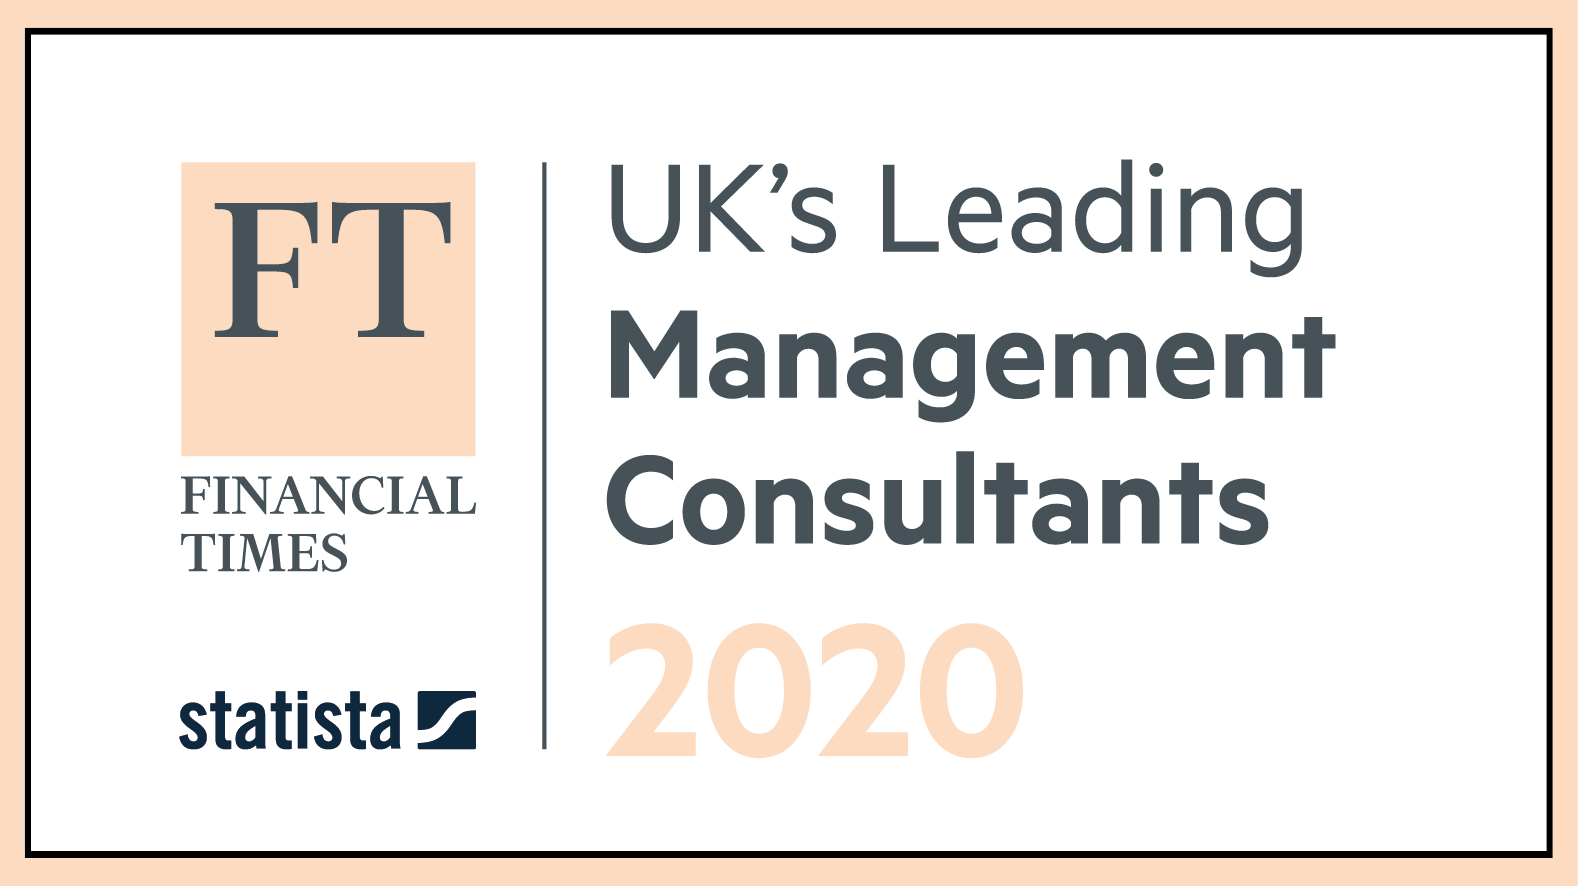 Curzon Consulting Financial Times UK Leading Management Consultants 2020